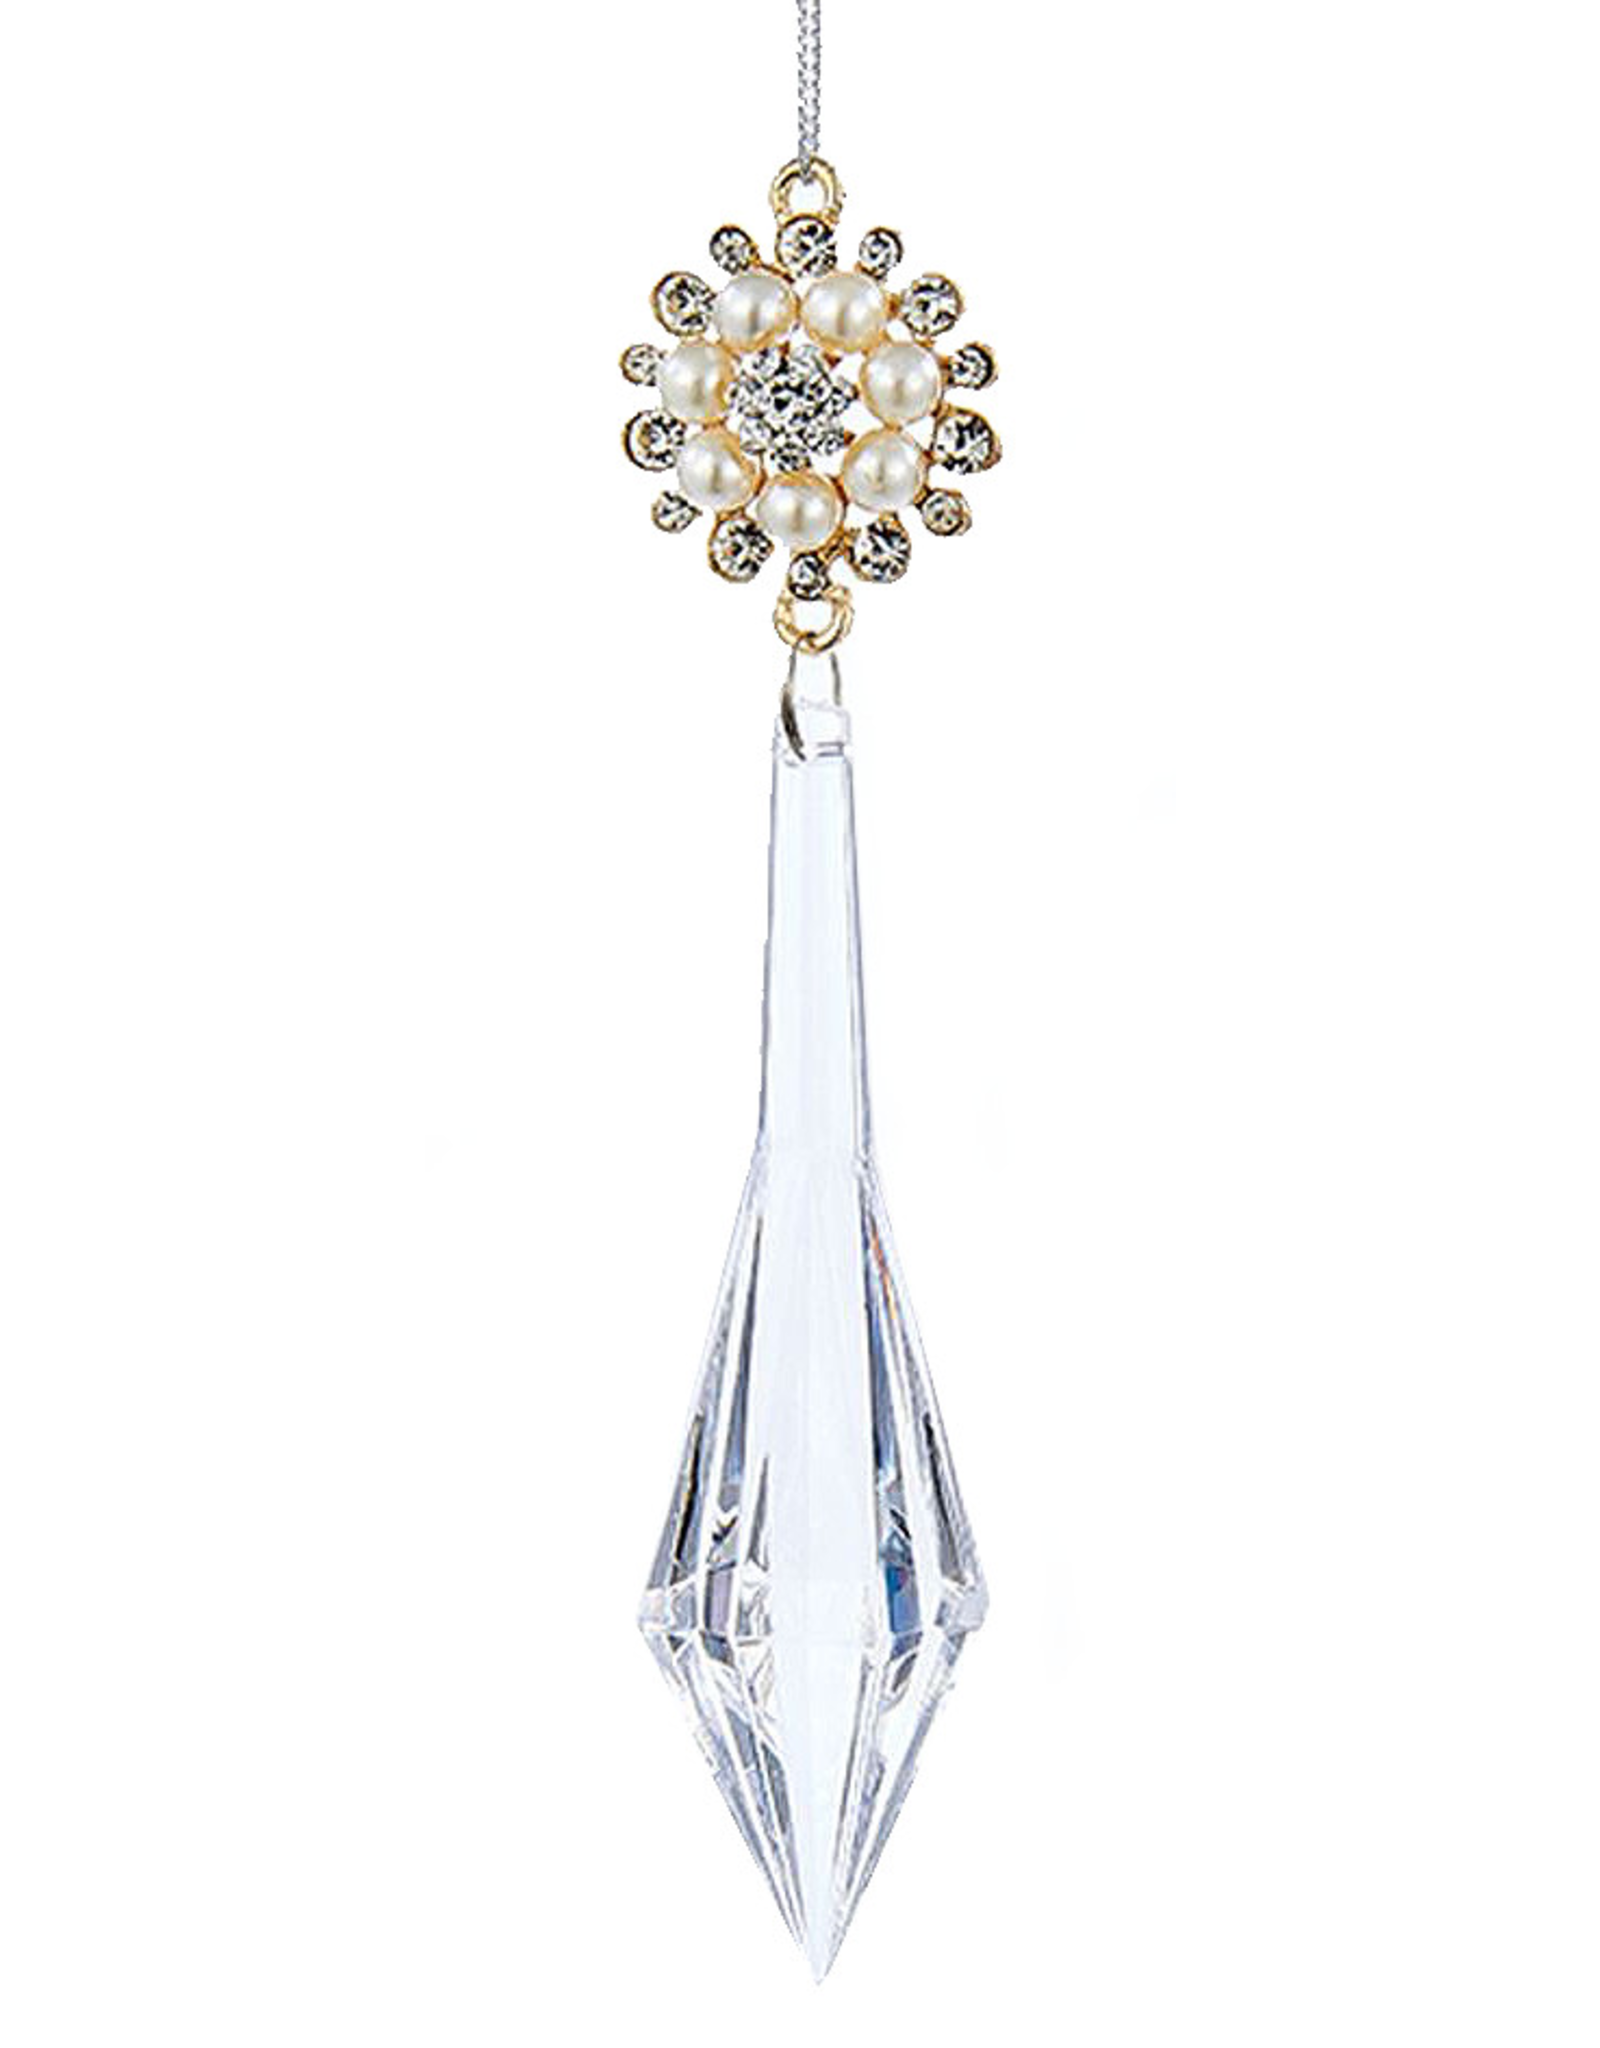 Kurt Adler Icicle Ornament w Jewels and Pearls 5.6 inch -A